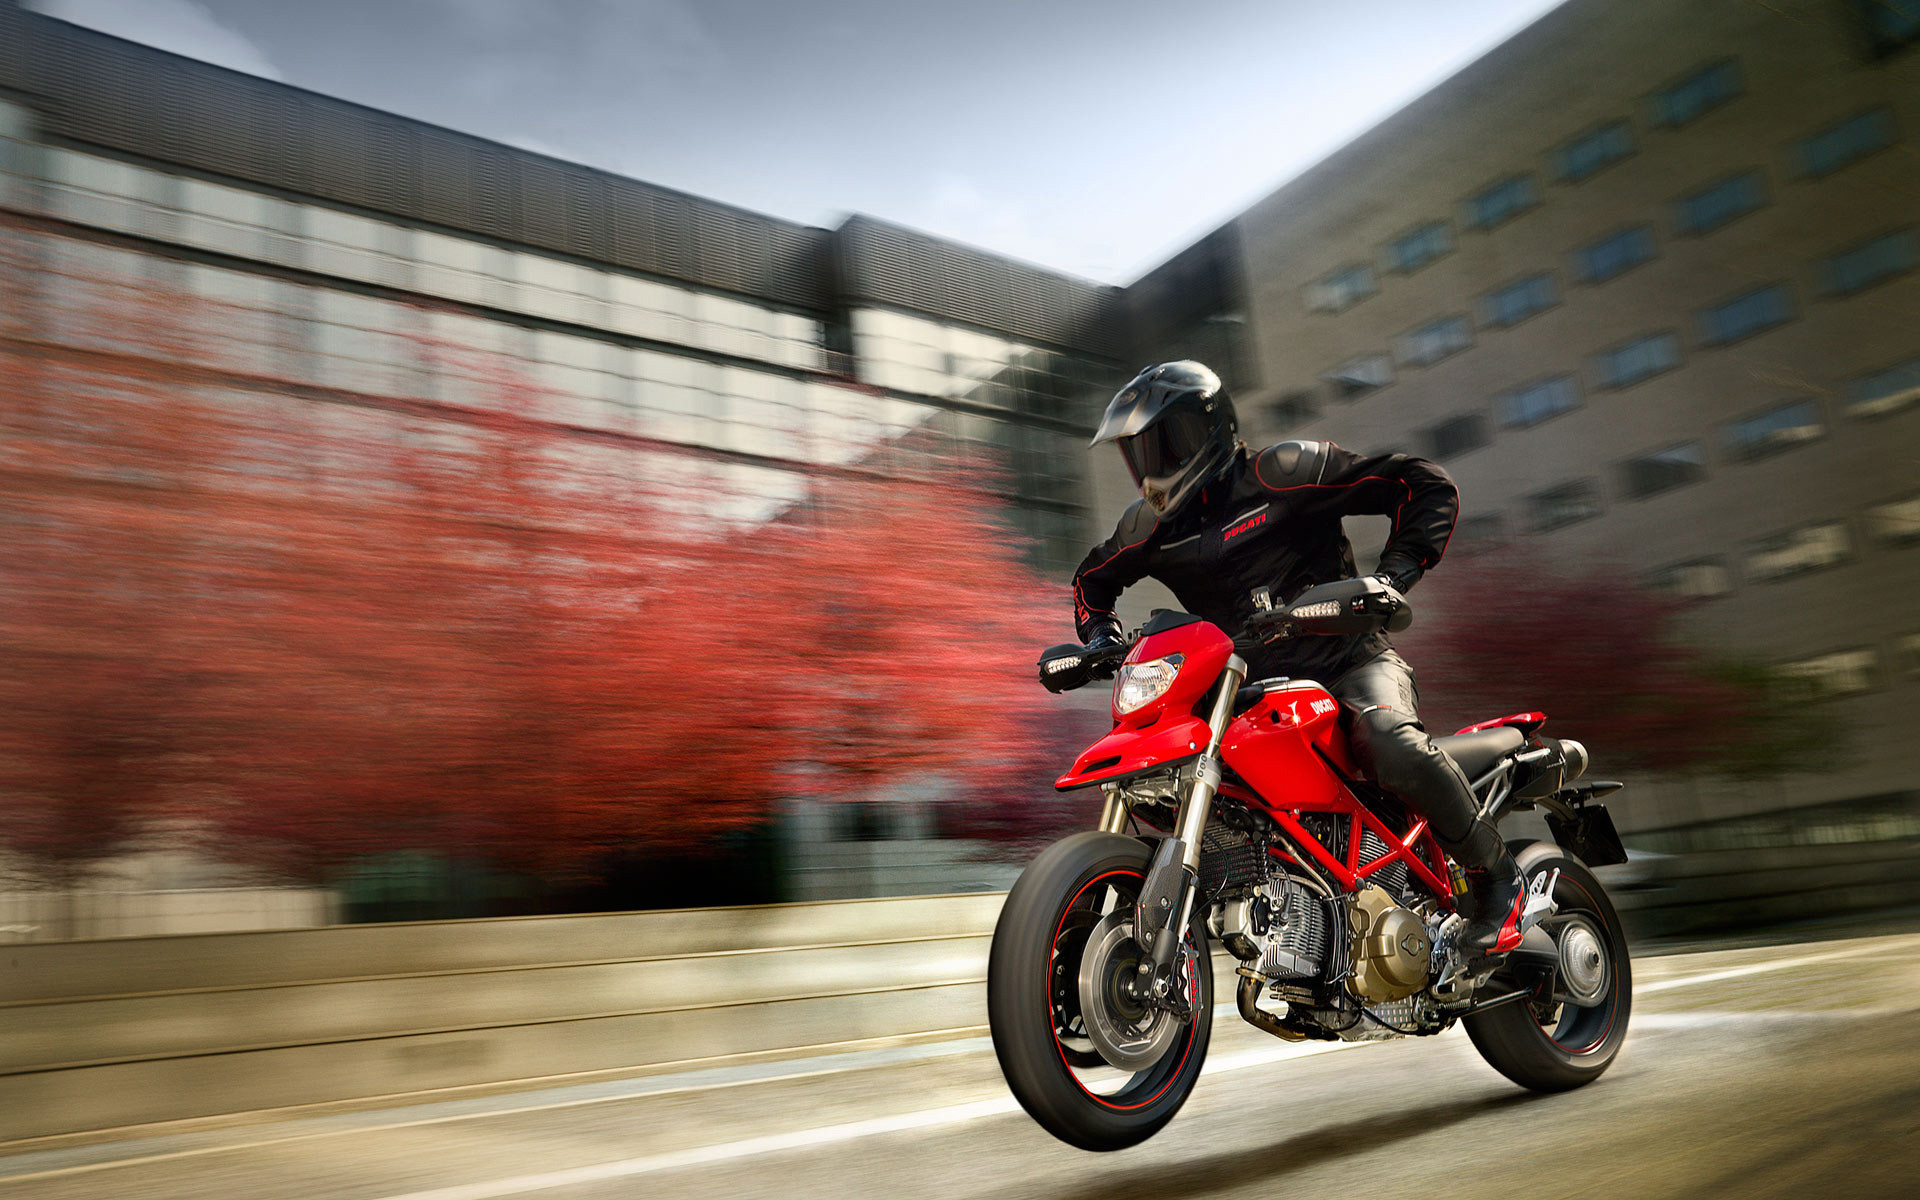 Ducati Hypermotard supermoto motorcycle | pictures for desktop and ...